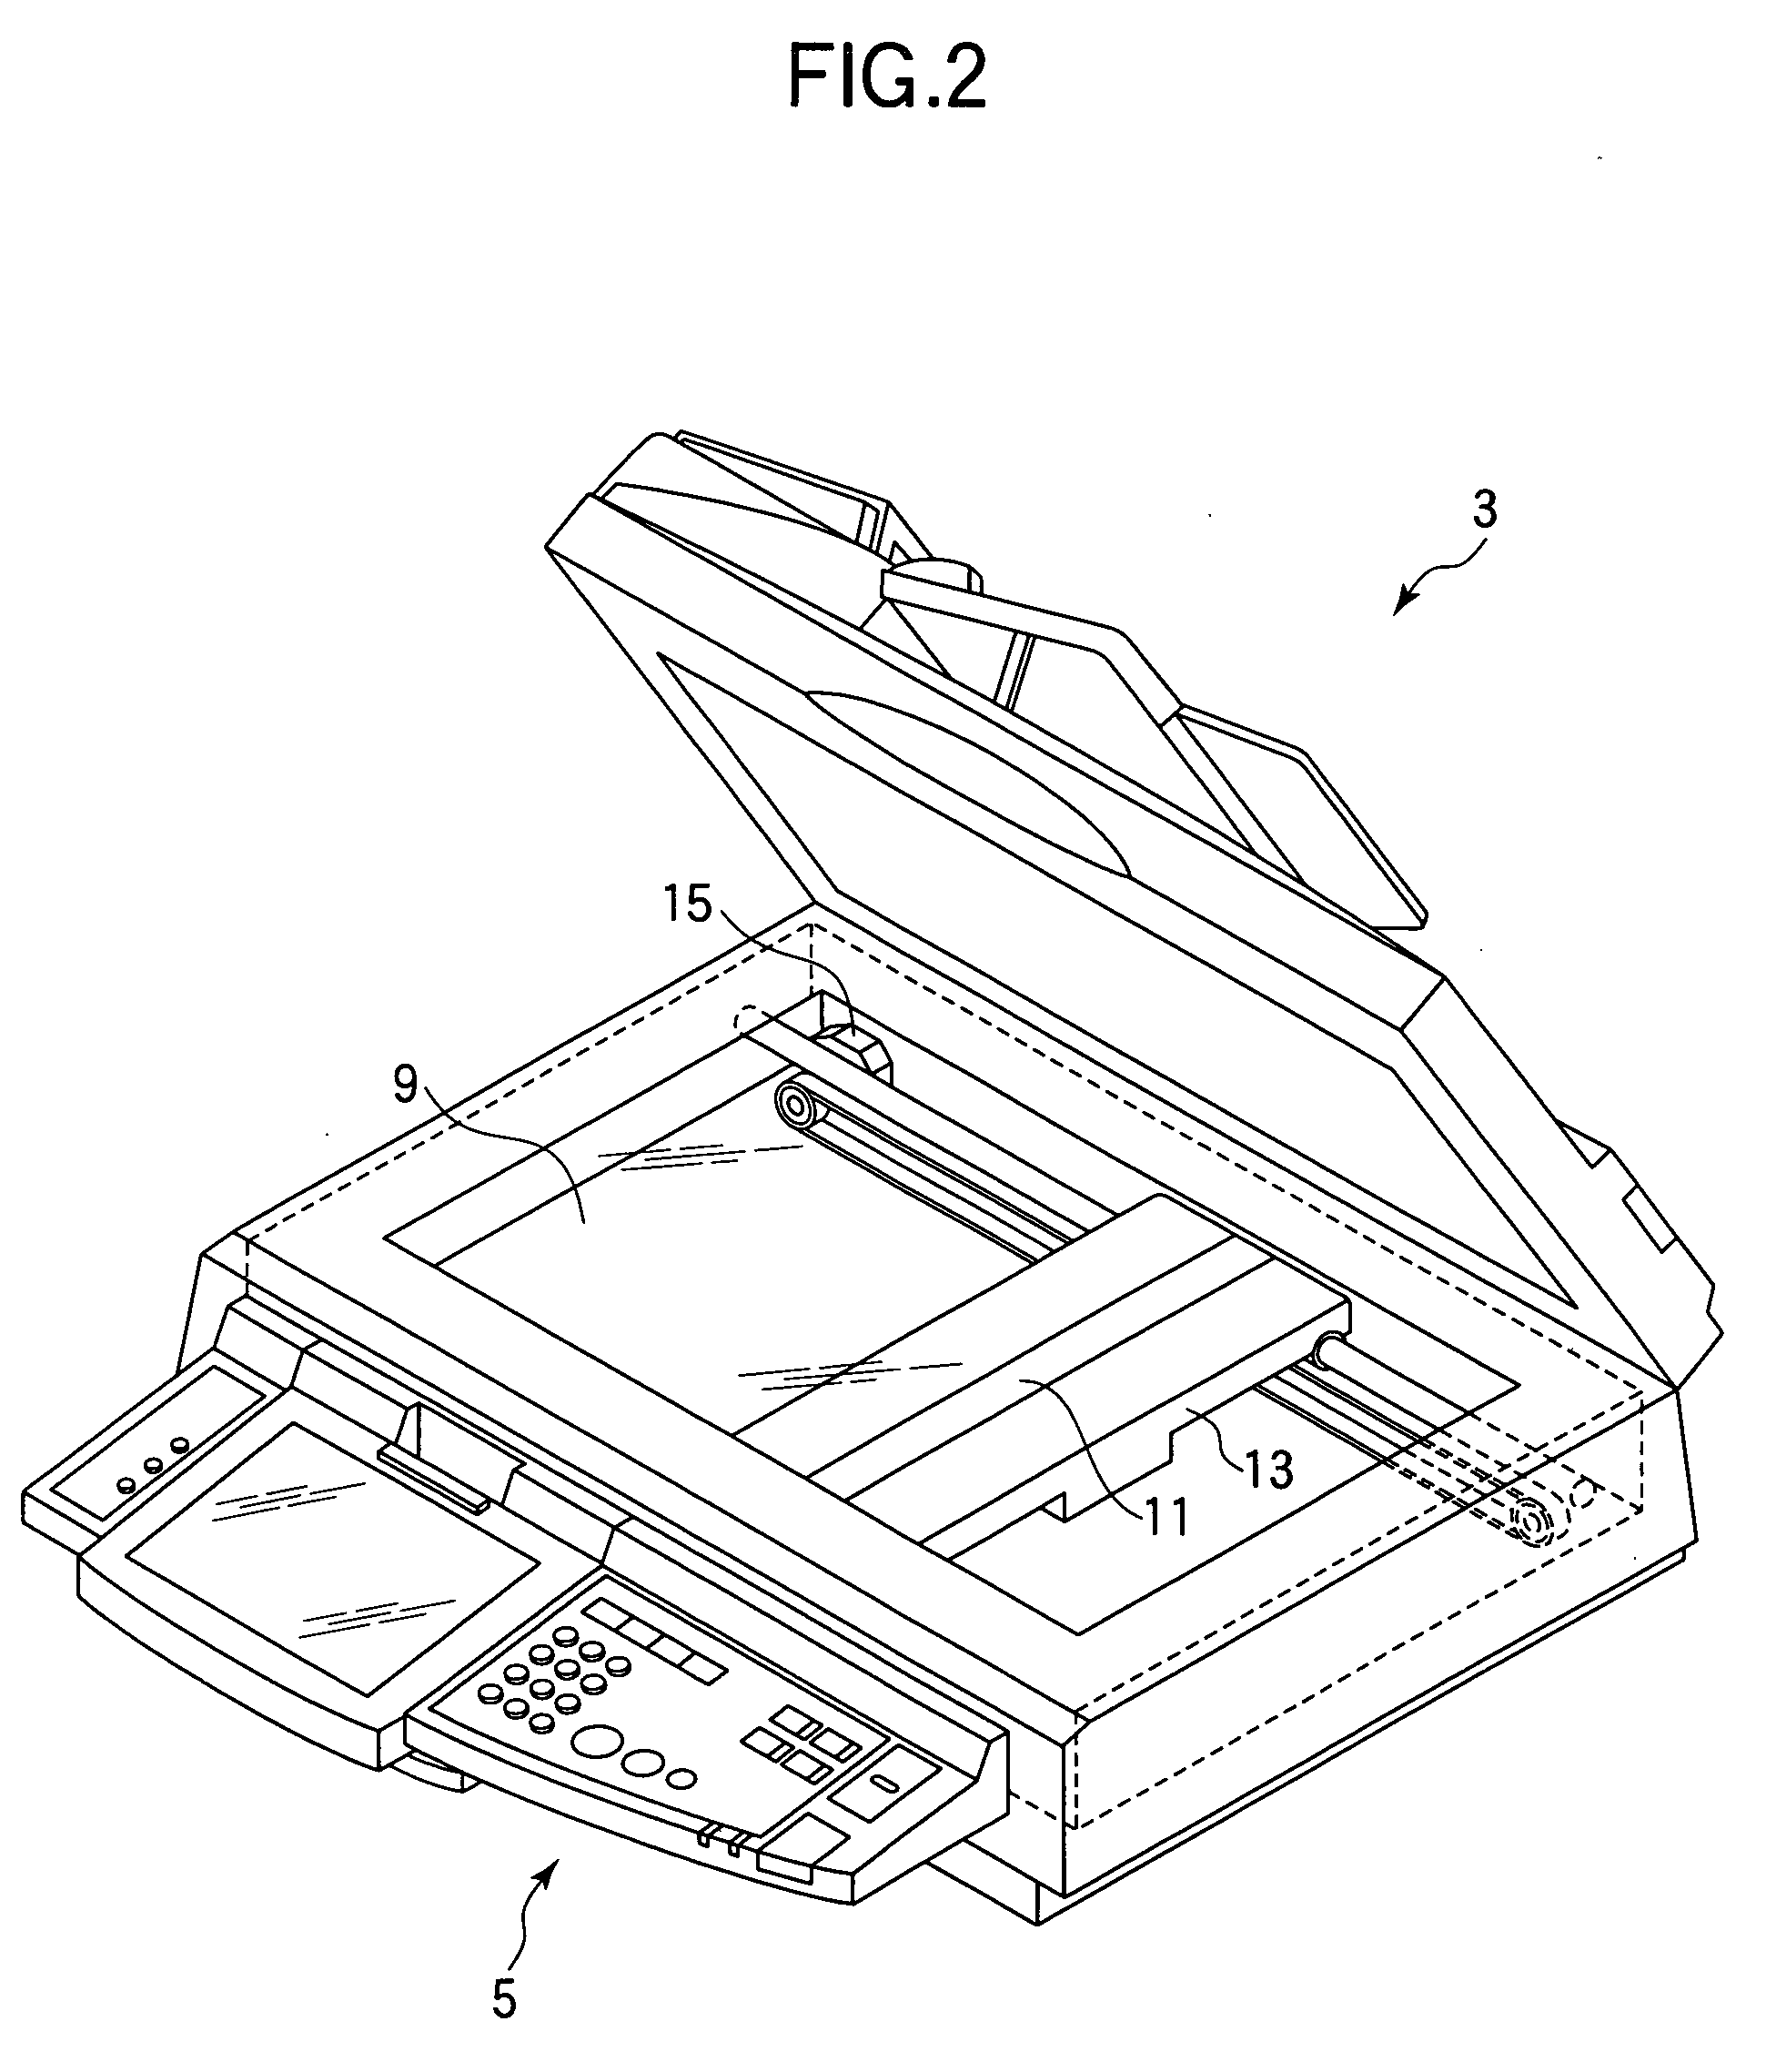 Image reading apparatus and method for processing images